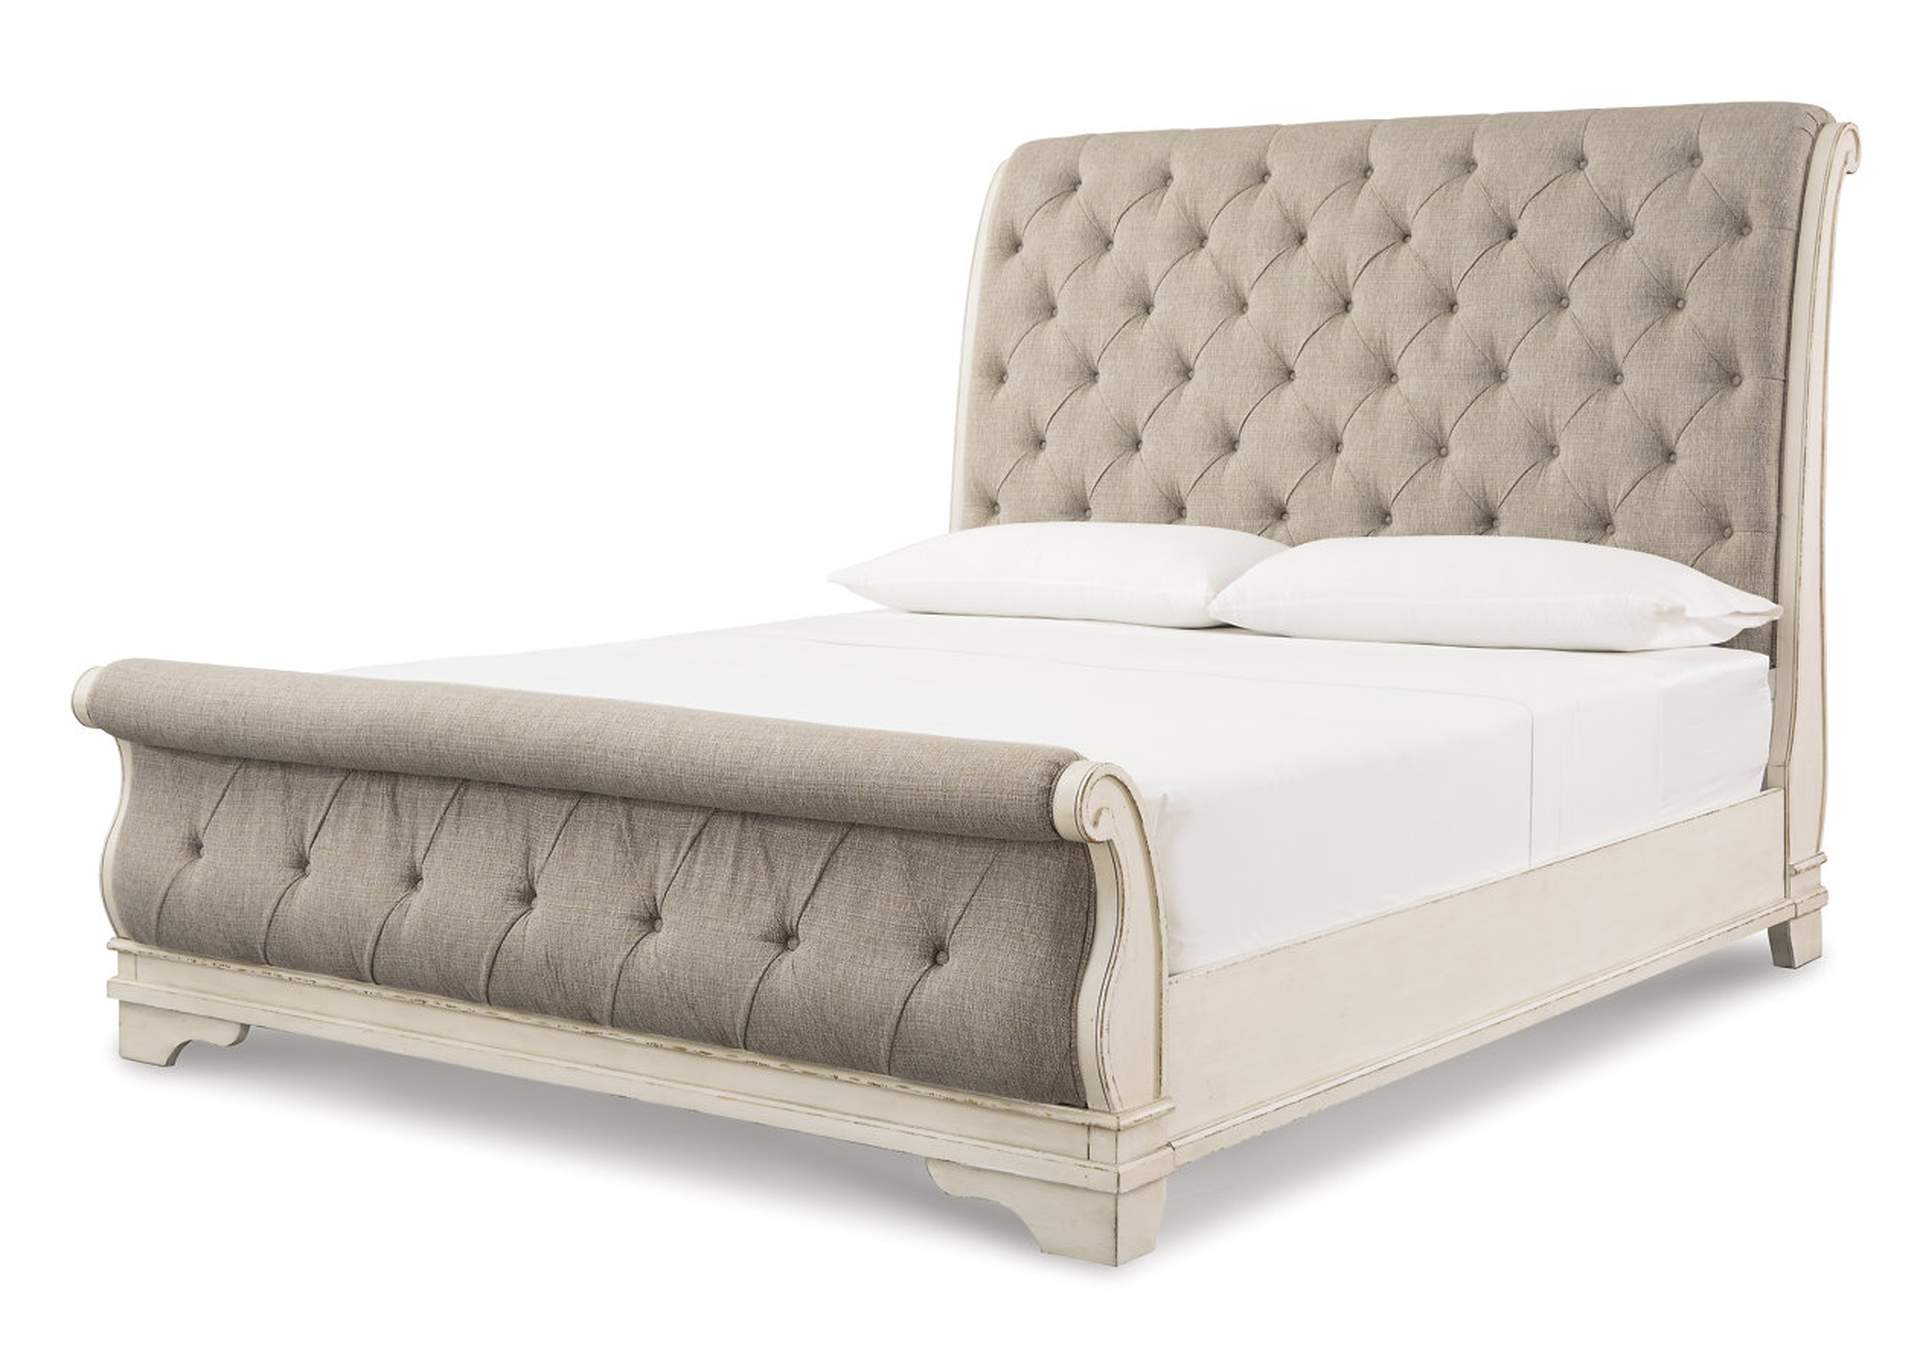 Realyn Chipped White California King, California King Upholstered Sleigh Bed